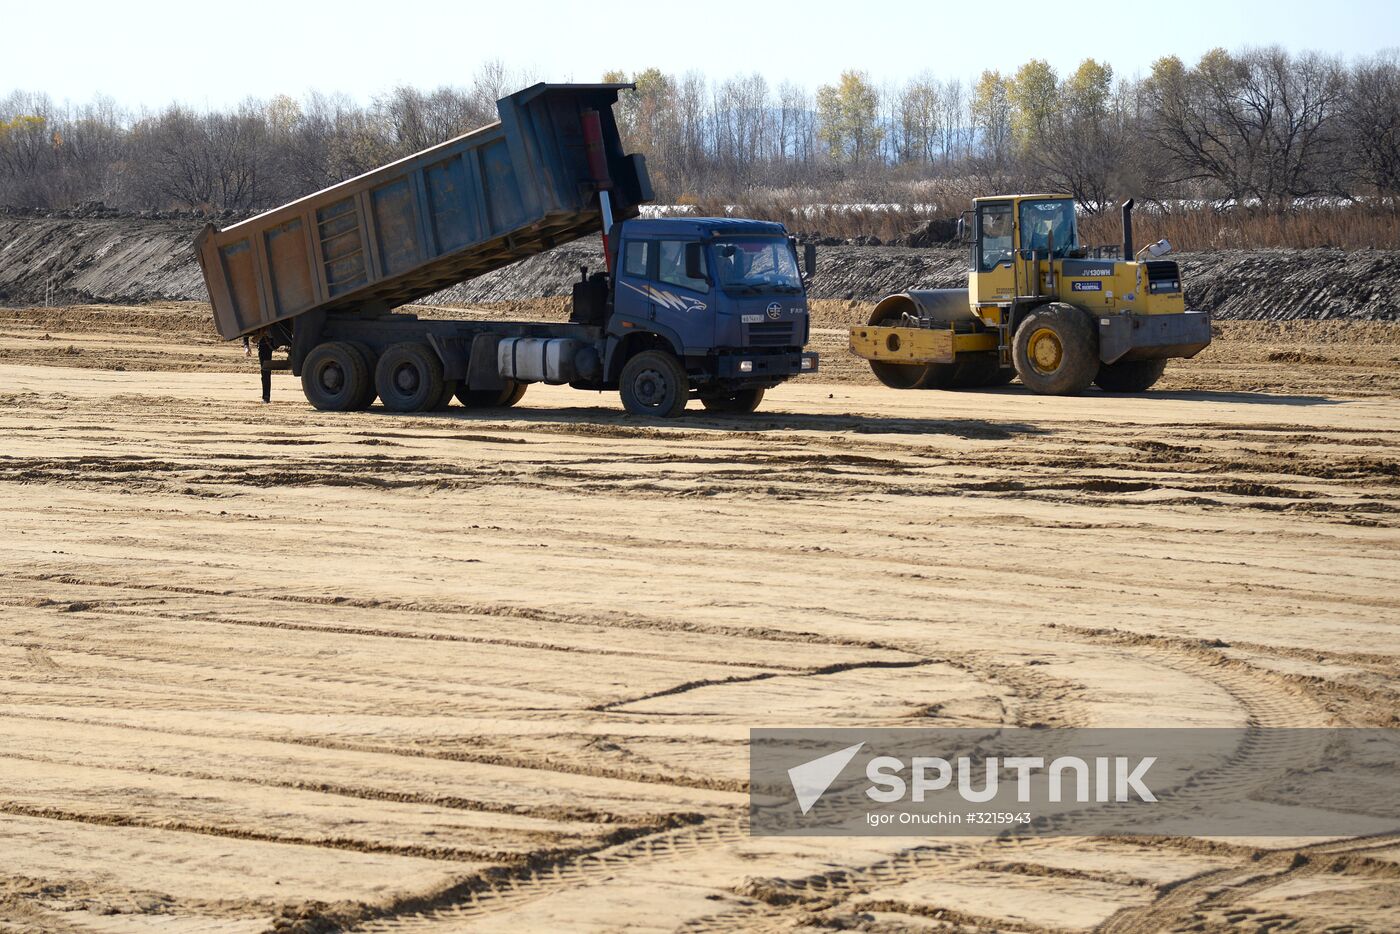 Construction of the Khabarovsk Bypass road